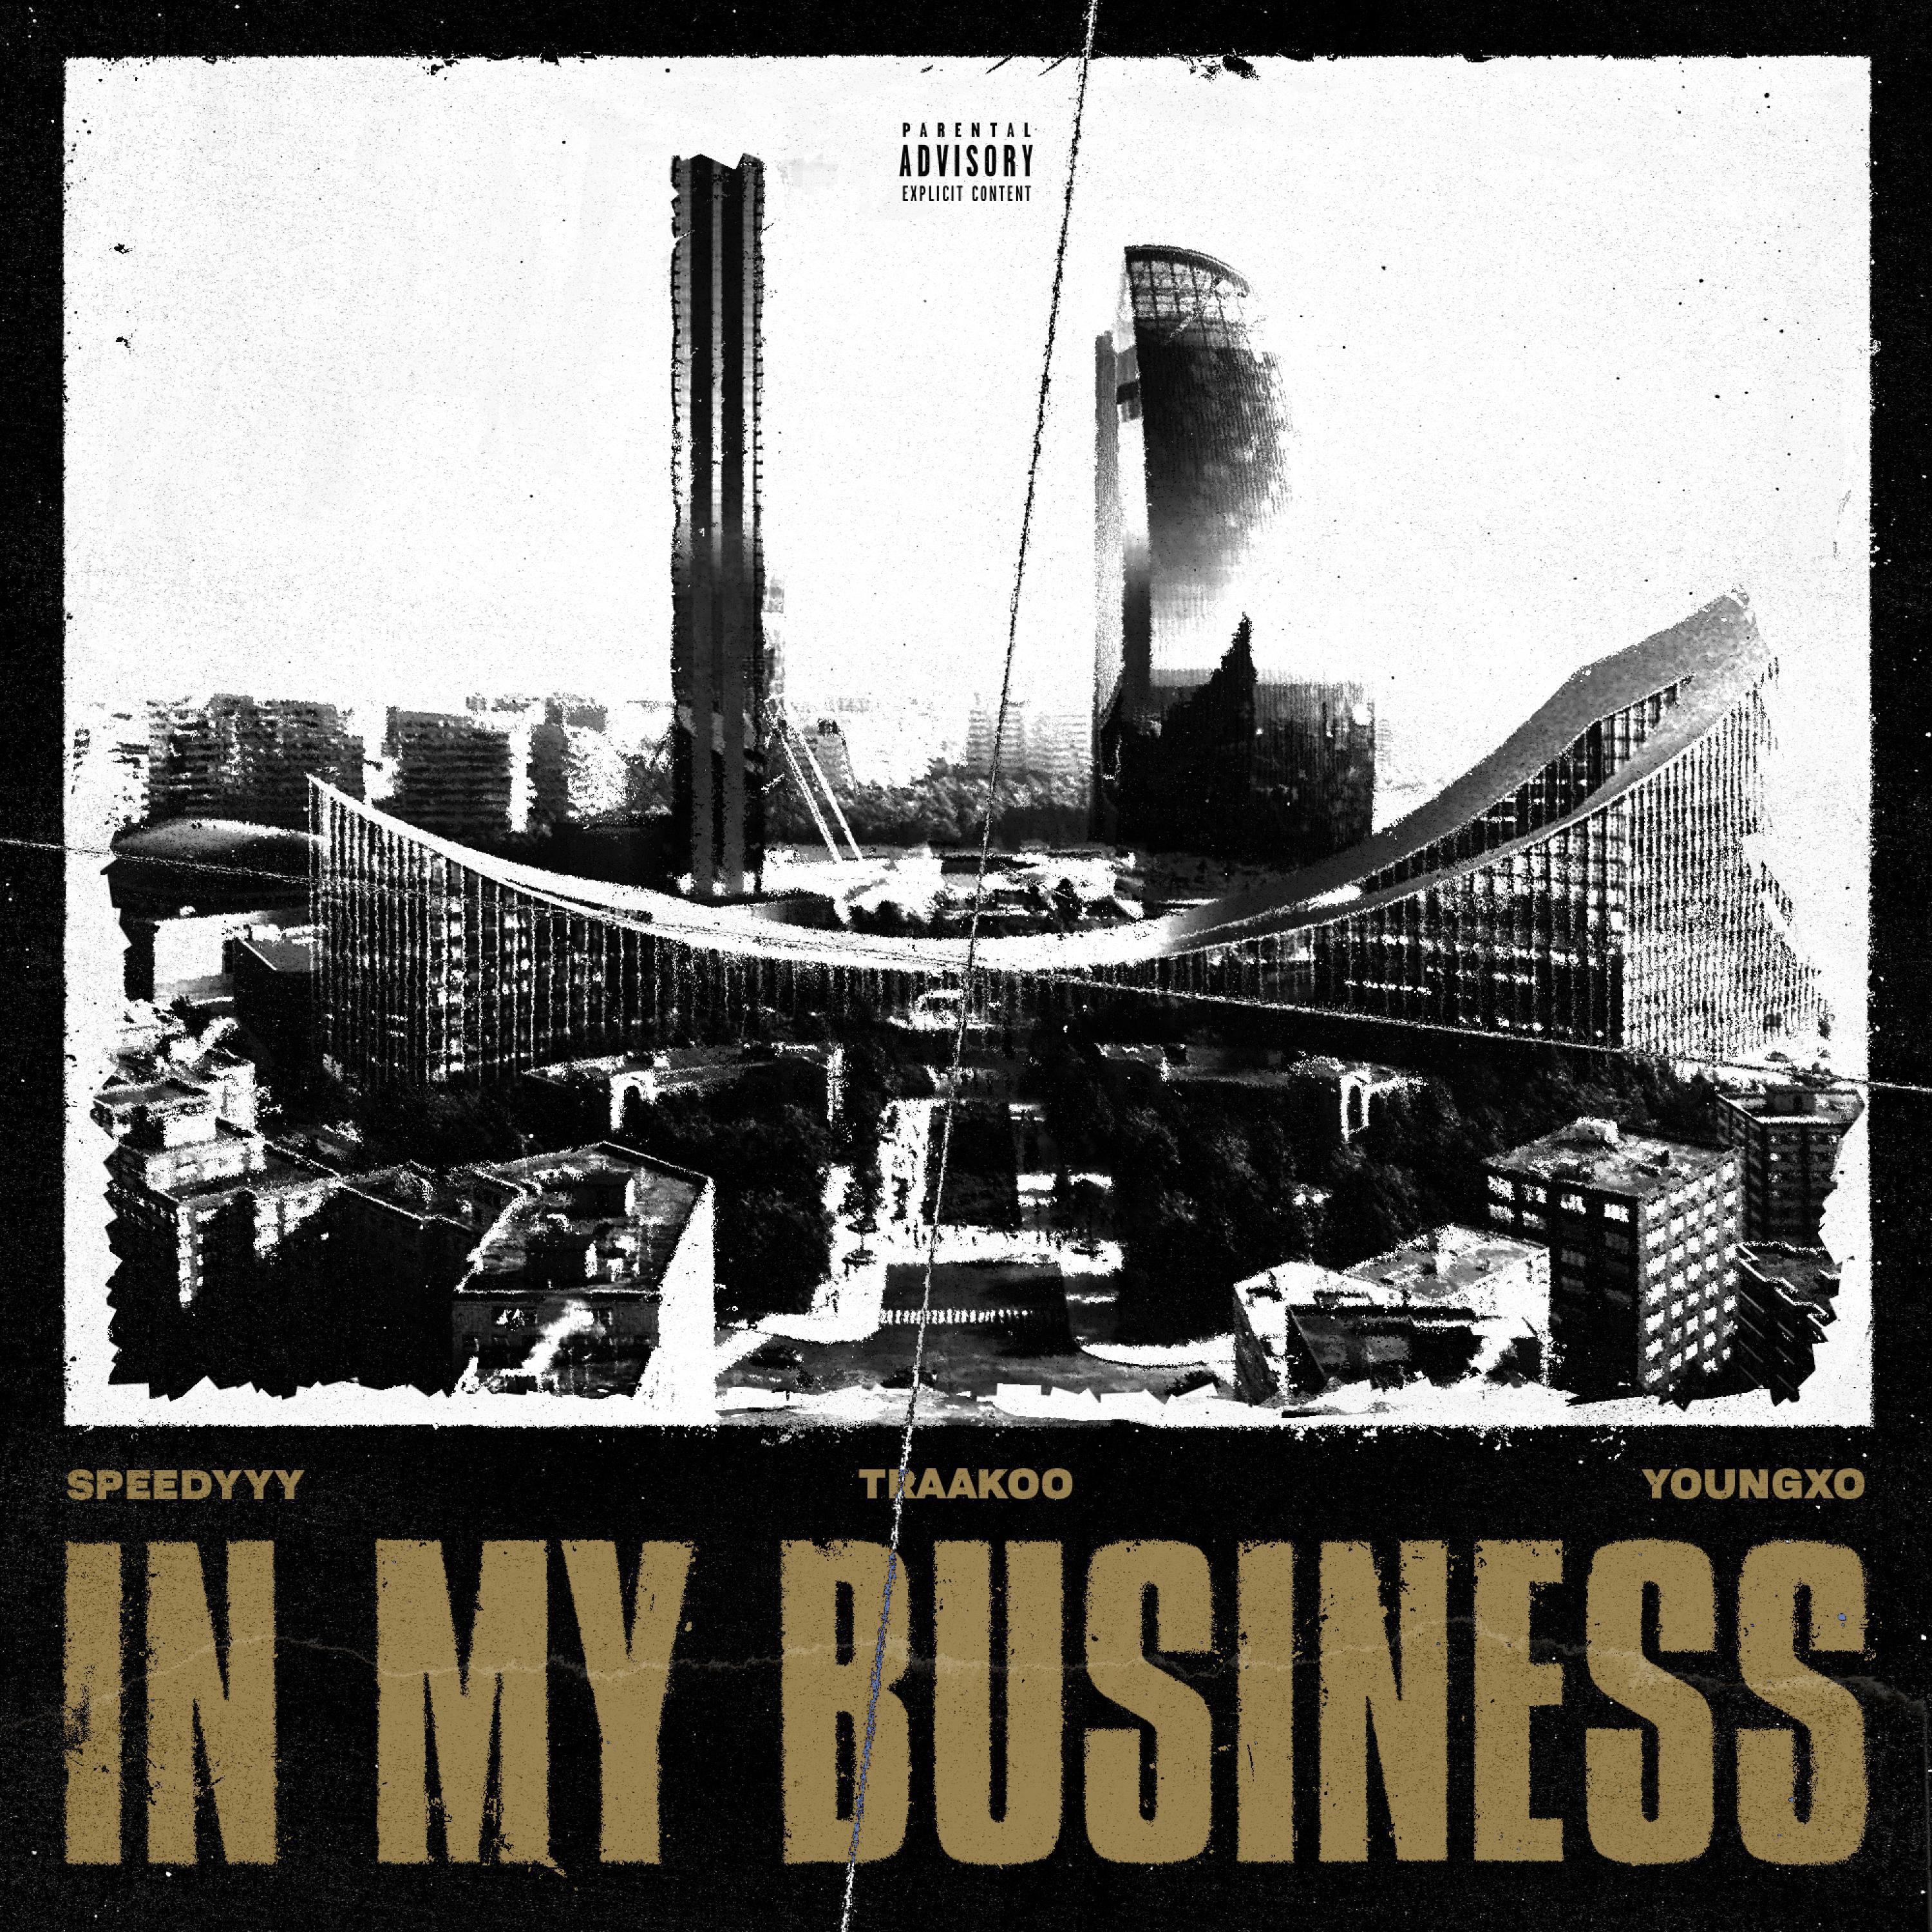 Traakoo - IN MY BUSINESS